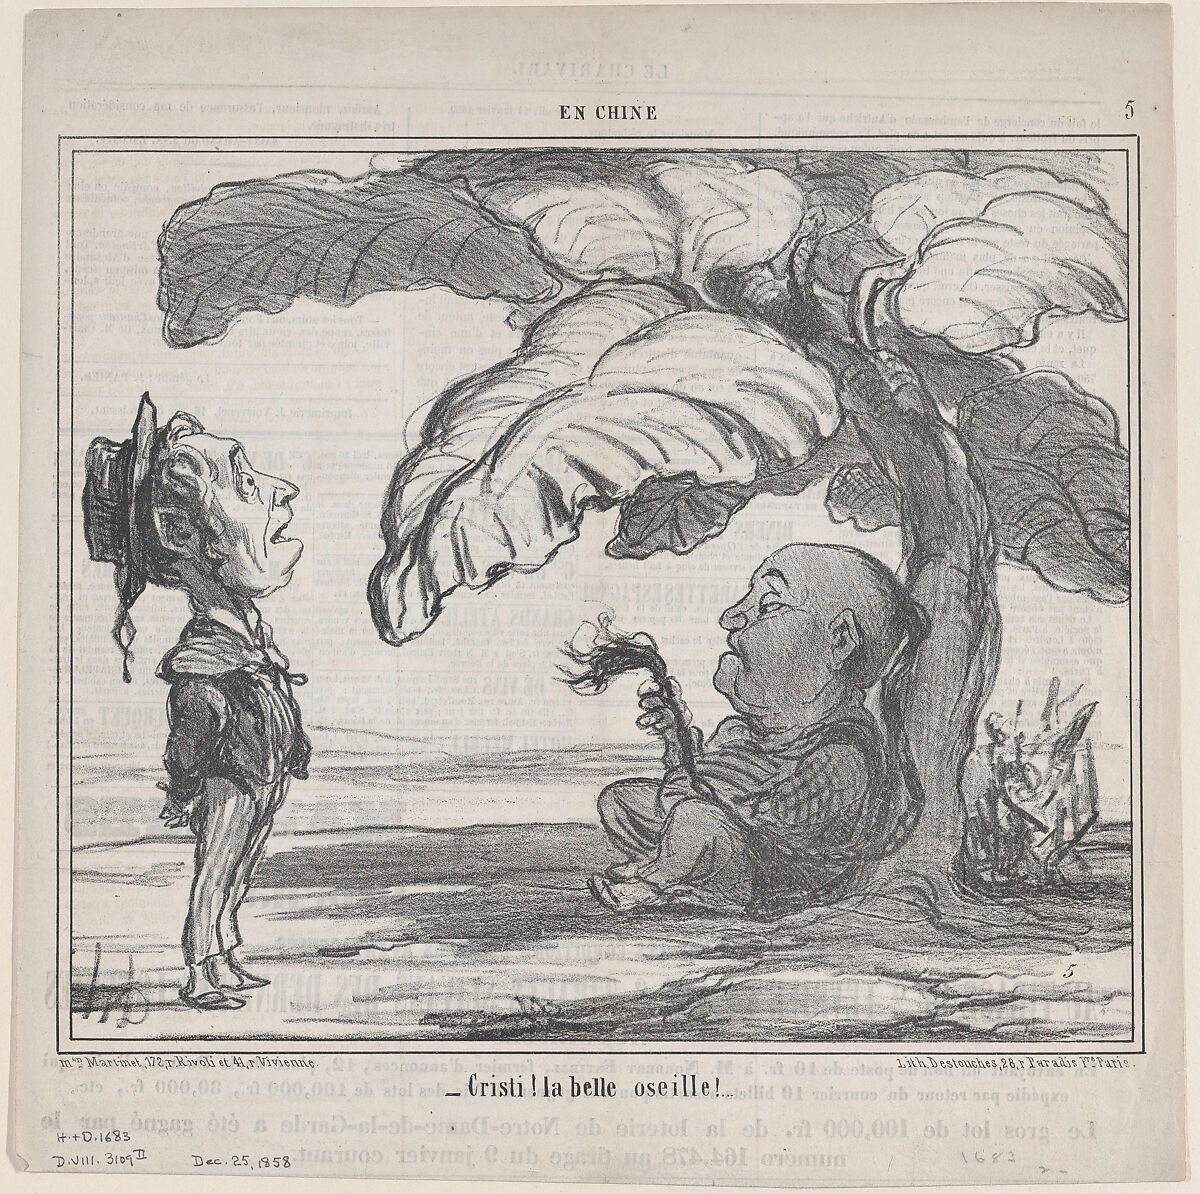 Cristi! la belle oseille!, from En Chine, published in Le Charivari, December 25, 1858, Honoré Daumier (French, Marseilles 1808–1879 Valmondois), Lithograph on newsprint; second state of two (Delteil) 